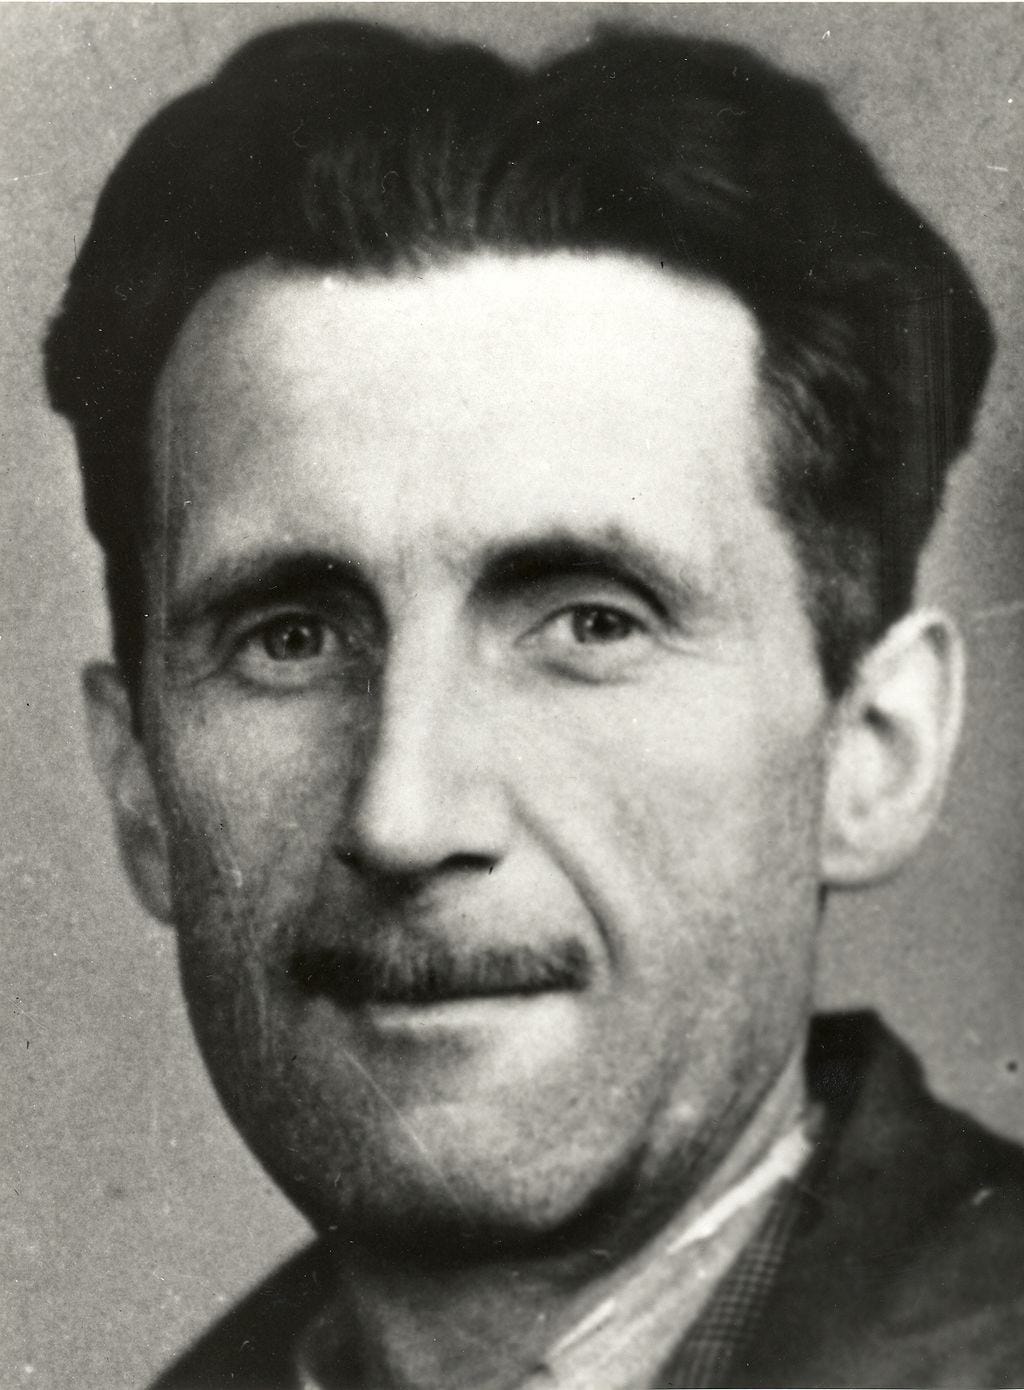 Retrato de George Orwell (Foto: Branch of the National Union of Journalists, via Wikimedia Commons)